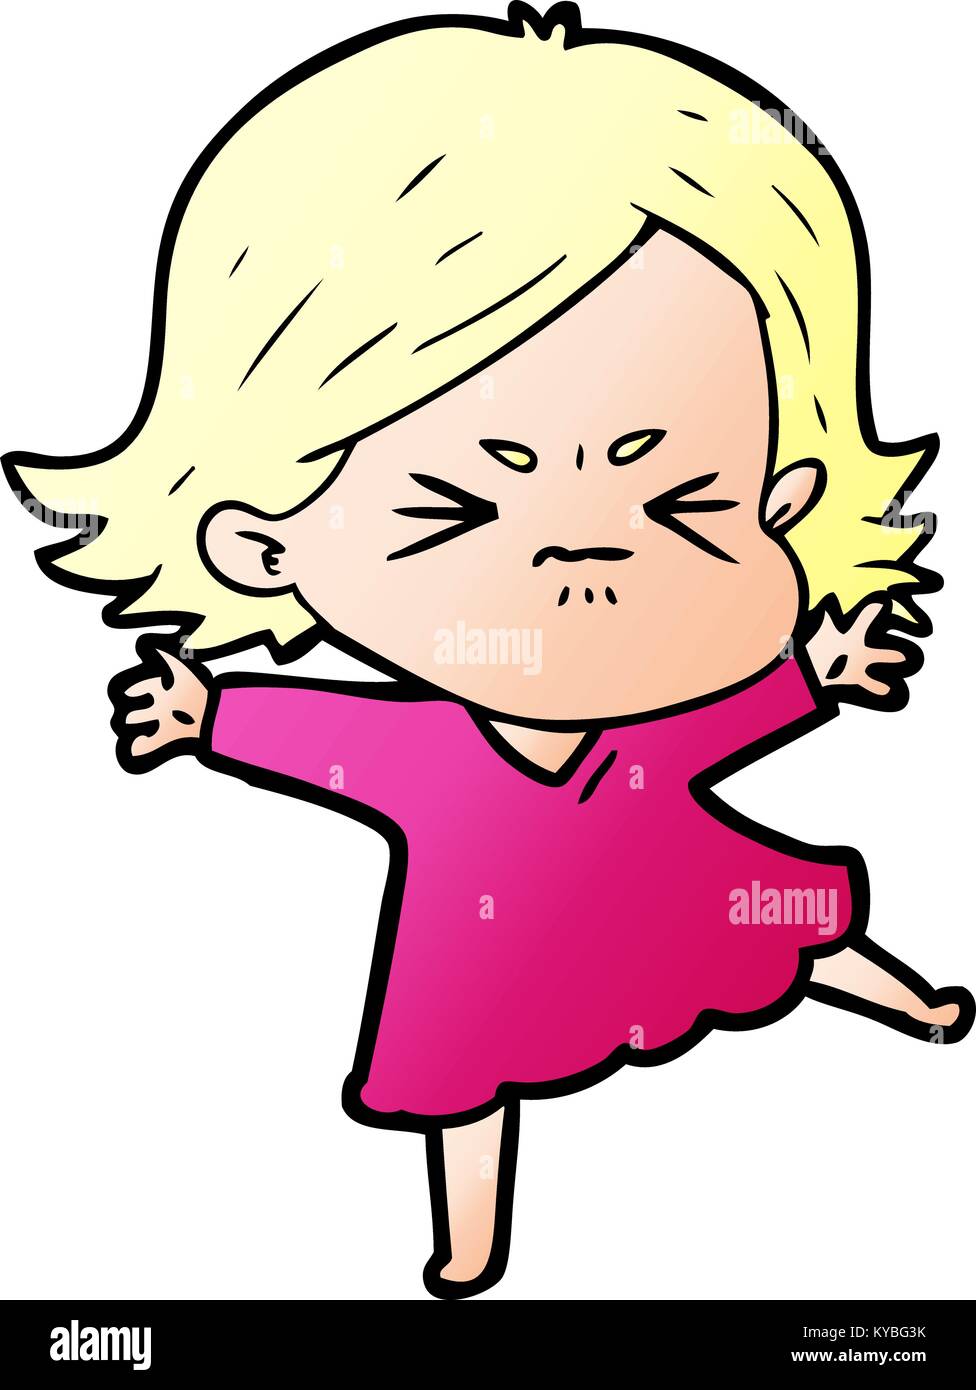 Cartoon Woman Angry High Resolution Stock Photography and Images - Alamy